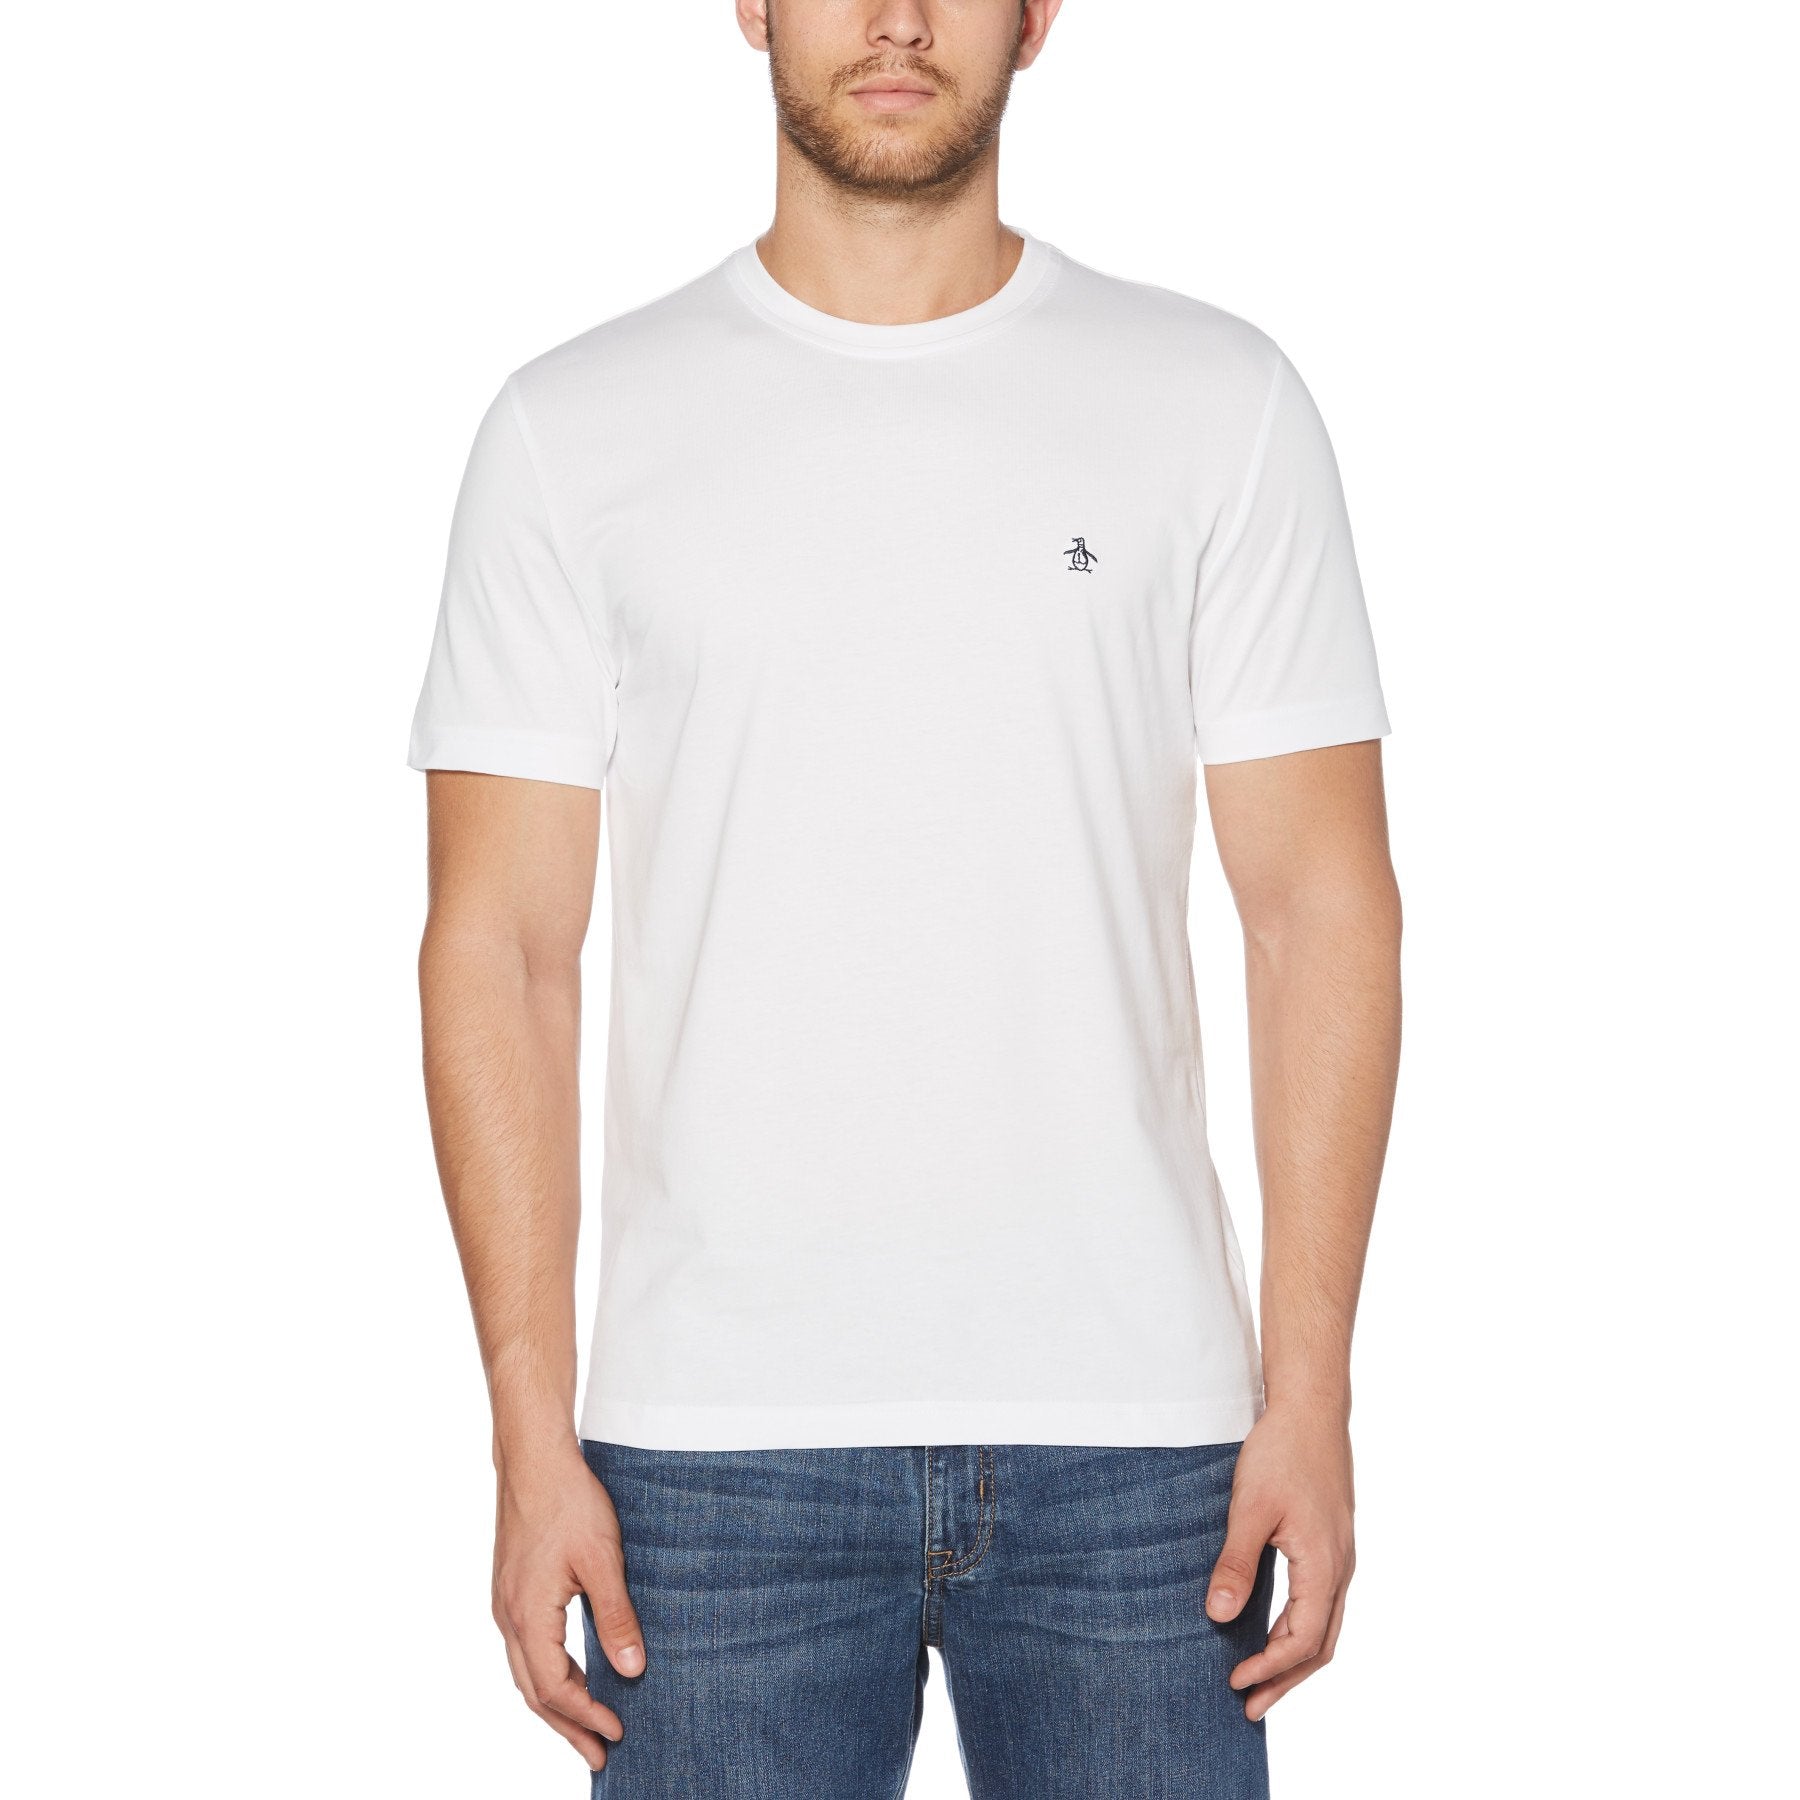 View Original Penguin Pin Point Embroidered Logo Organic Cotton TShirt In Bright White White Mens information